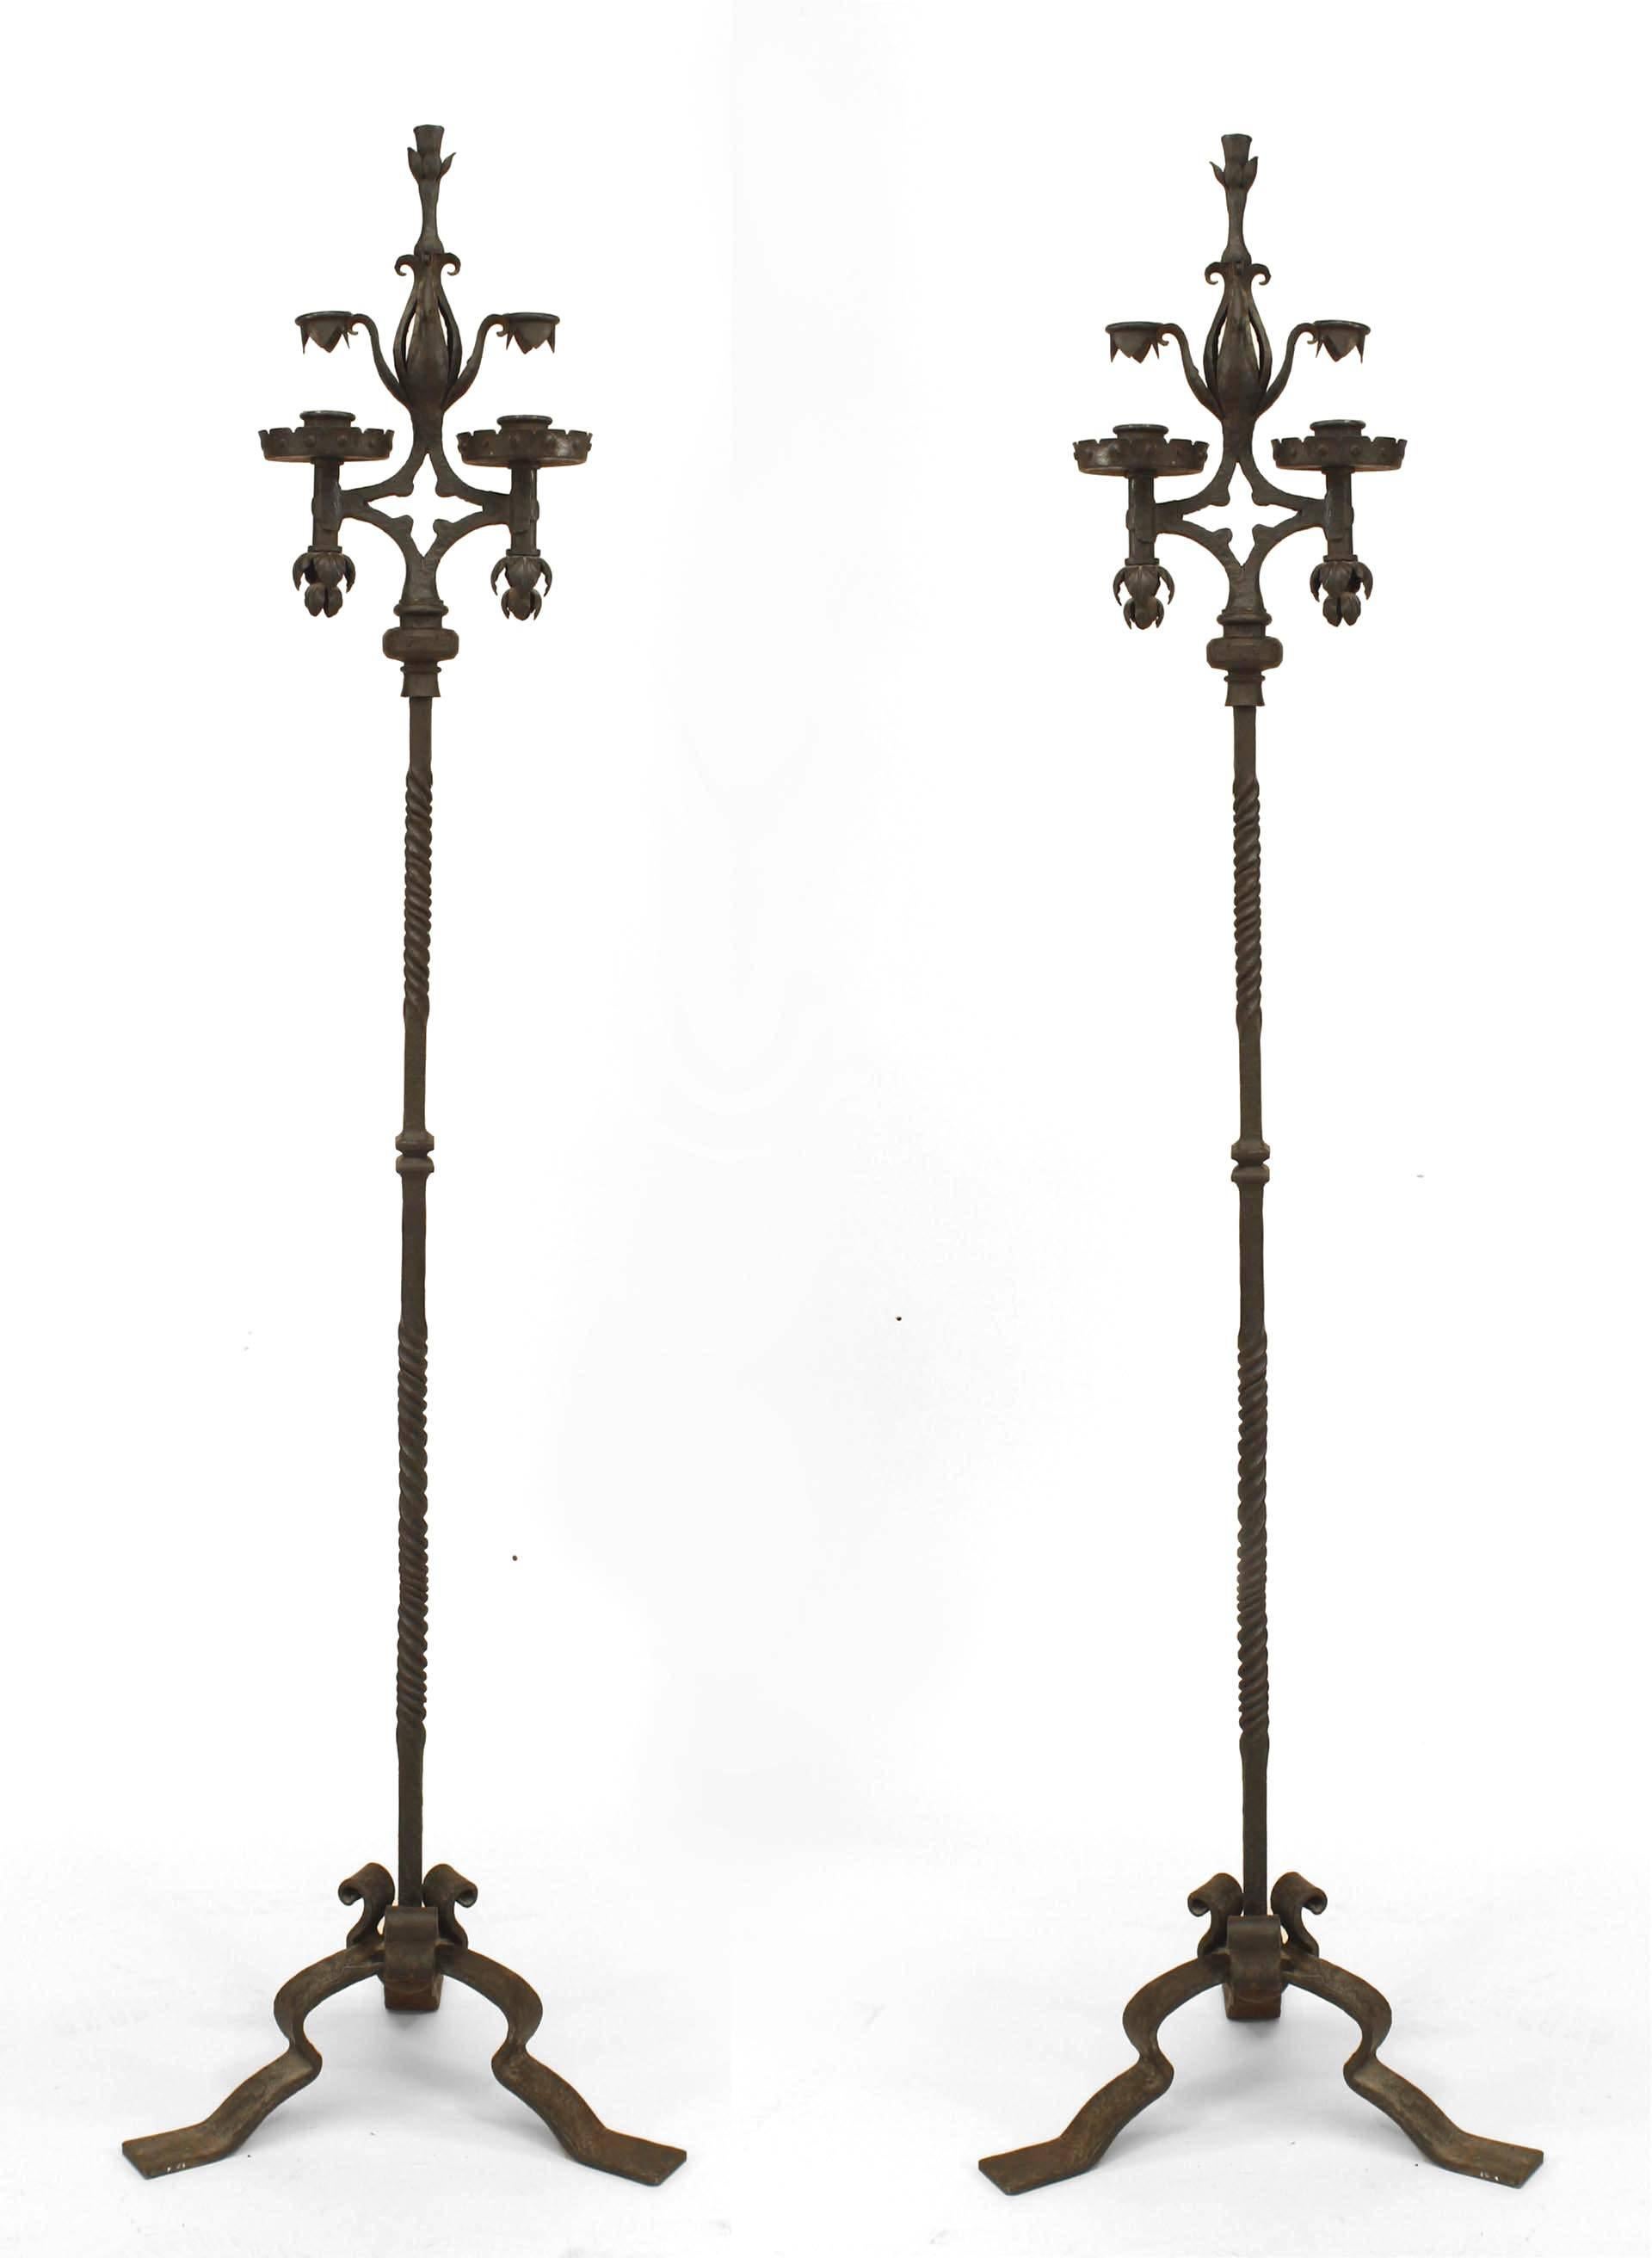 Pair of French Victorian (19th/20th Century) wrought iron 2 light candle stands with foliate details supported on 3 legs (PRICED AS Pair).
